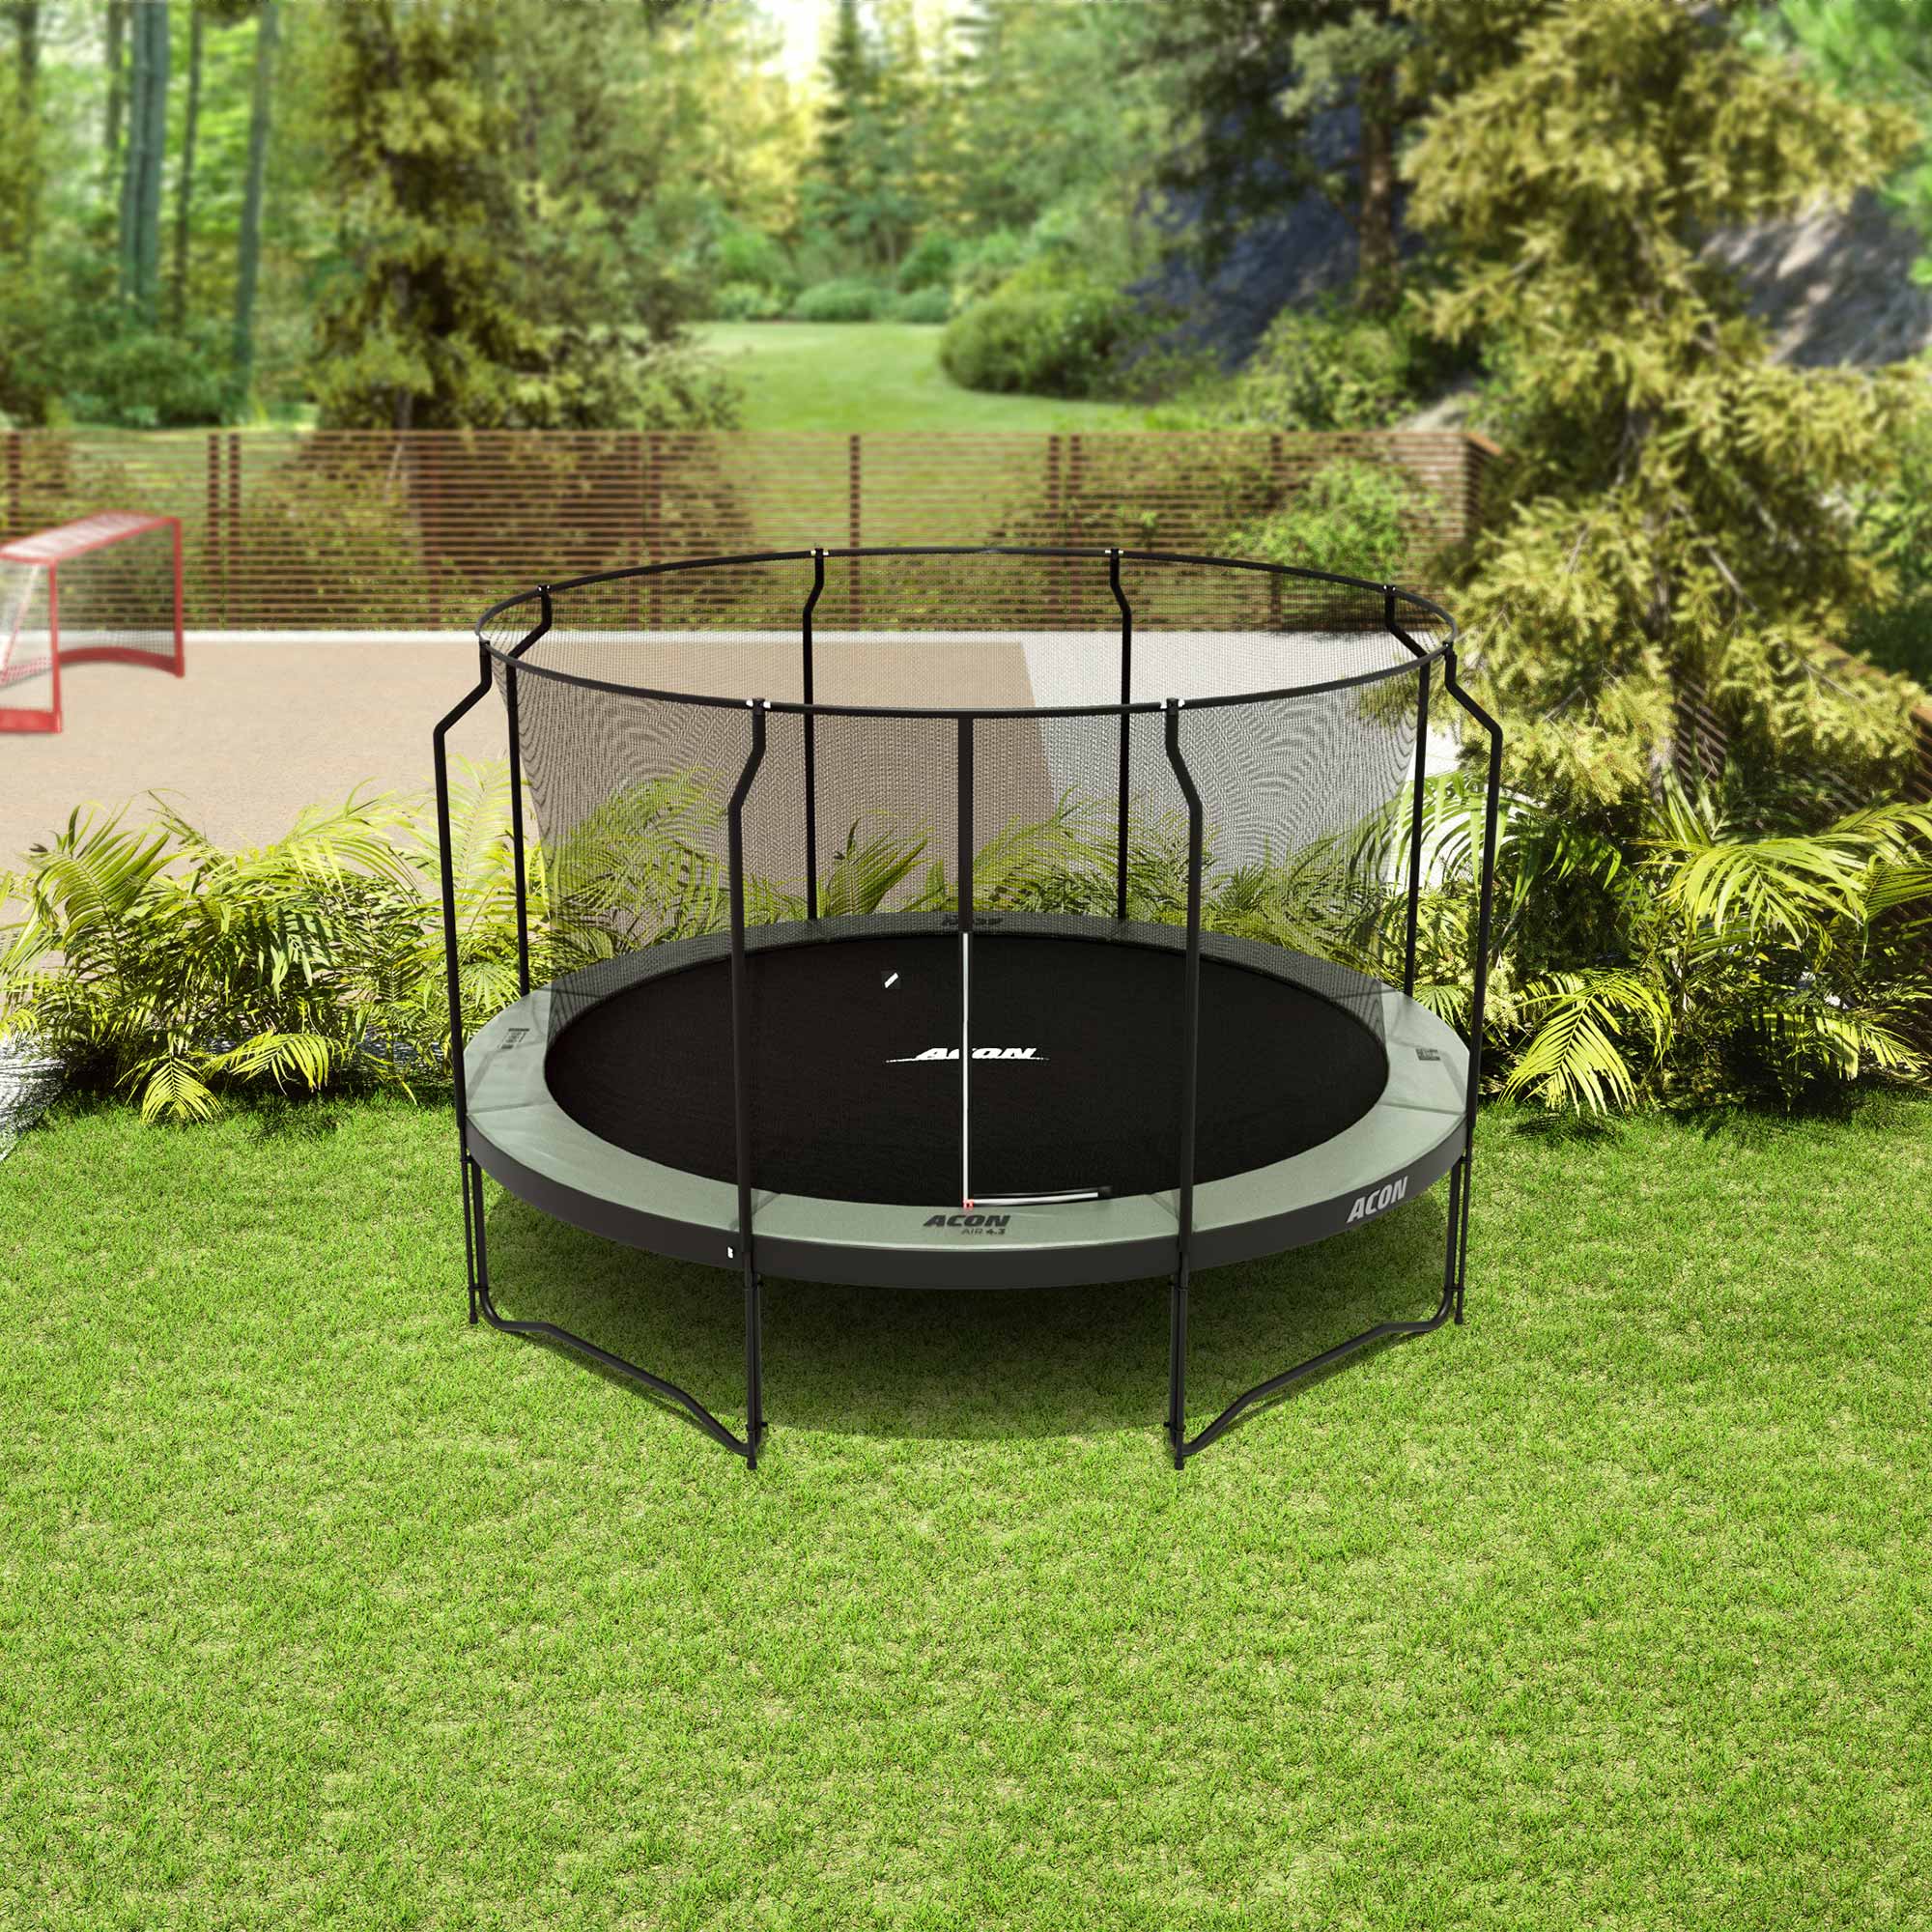 ACON Air 14ft Trampoline with Premium Enclosure in the backyard.